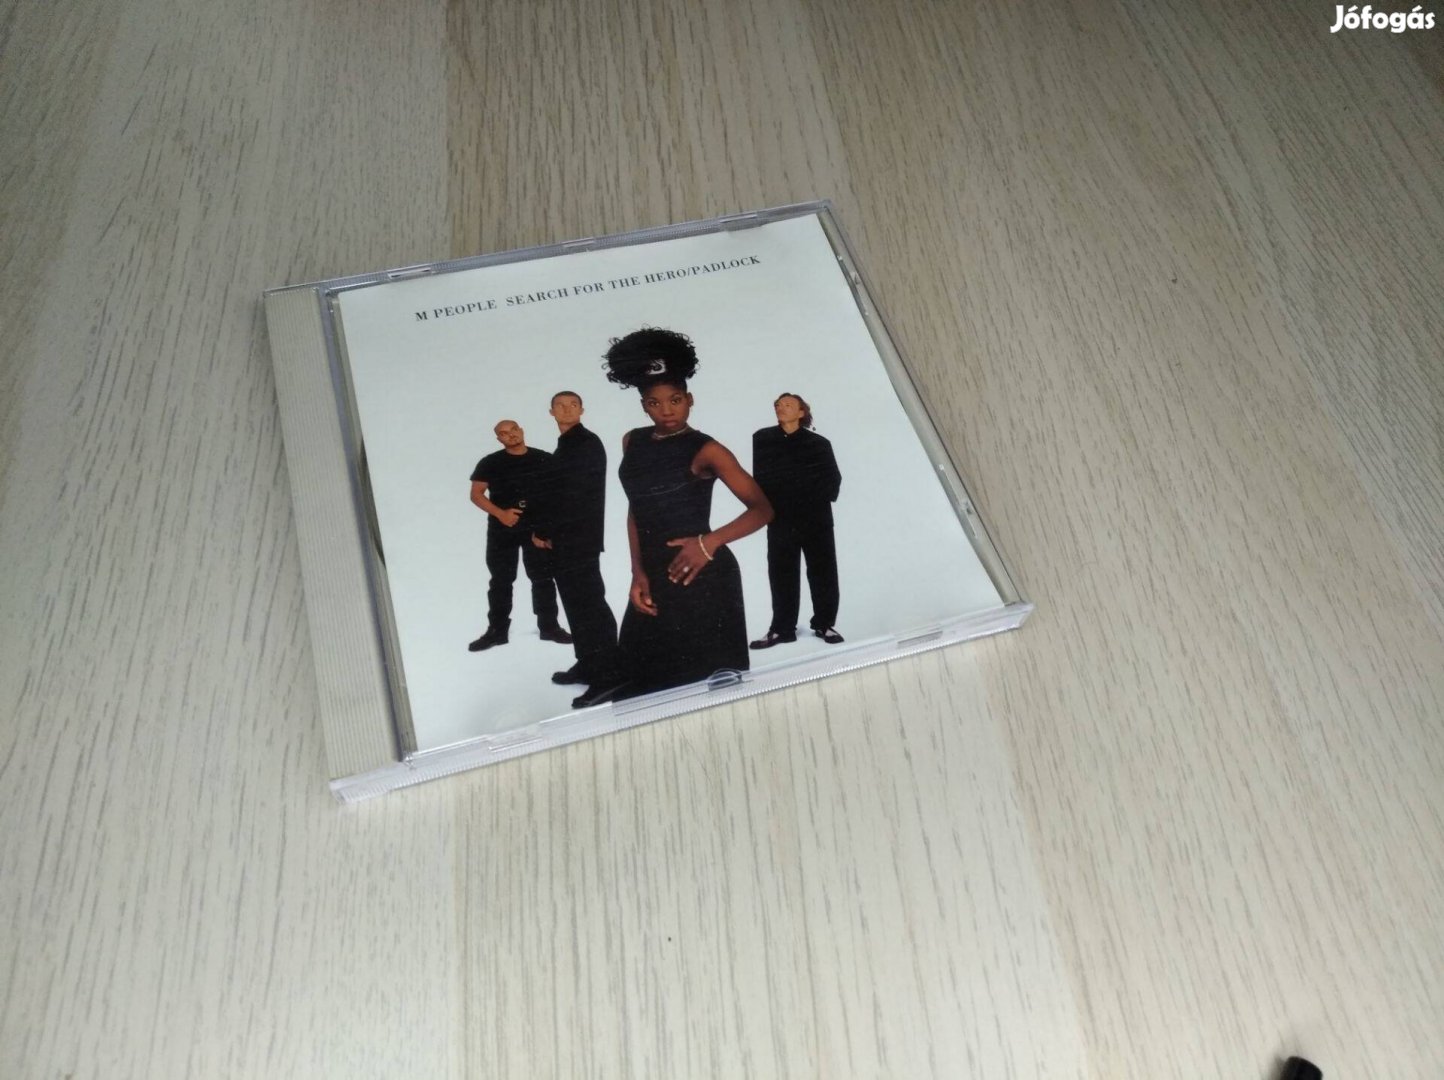 M People - Search For The Hero / Padlock / Maxi CD 1995